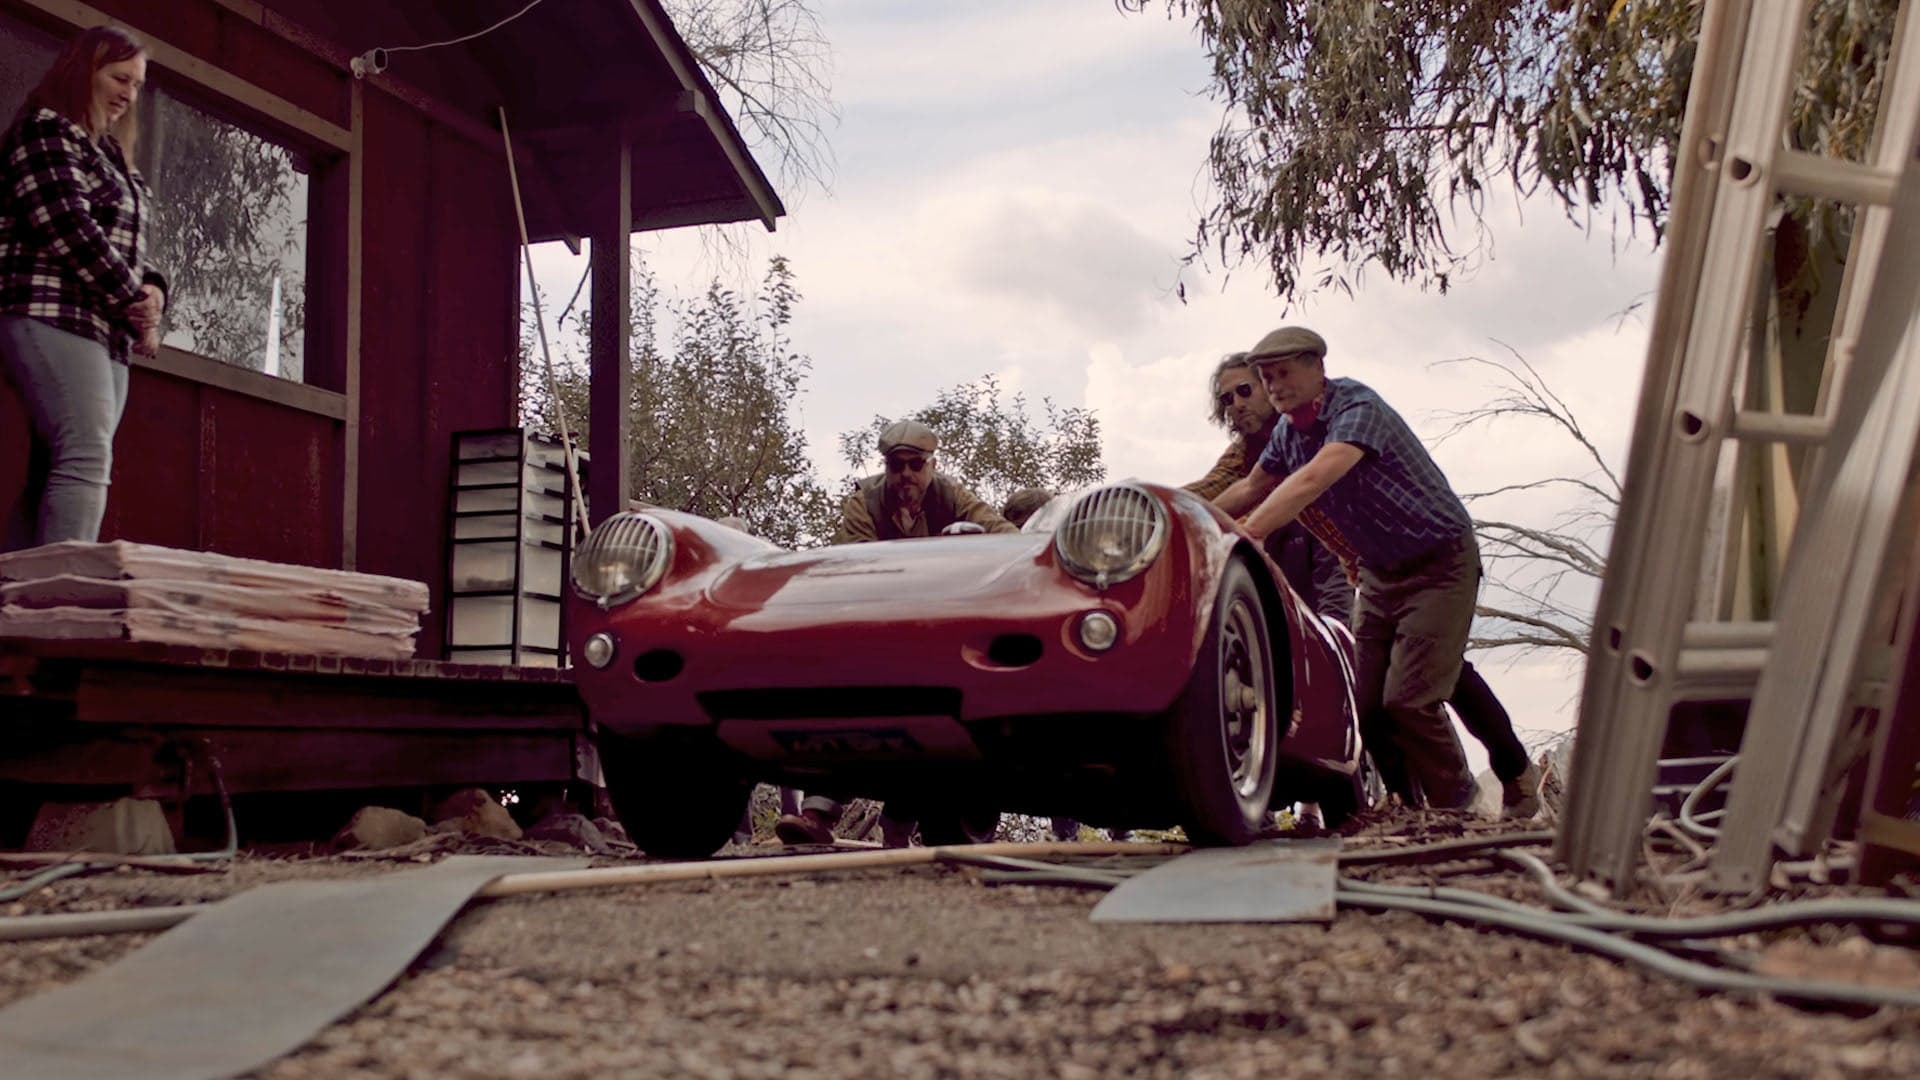 1955 Porsche 550 Spyder Emerges from California Storage Container After 35 Years in Hiding